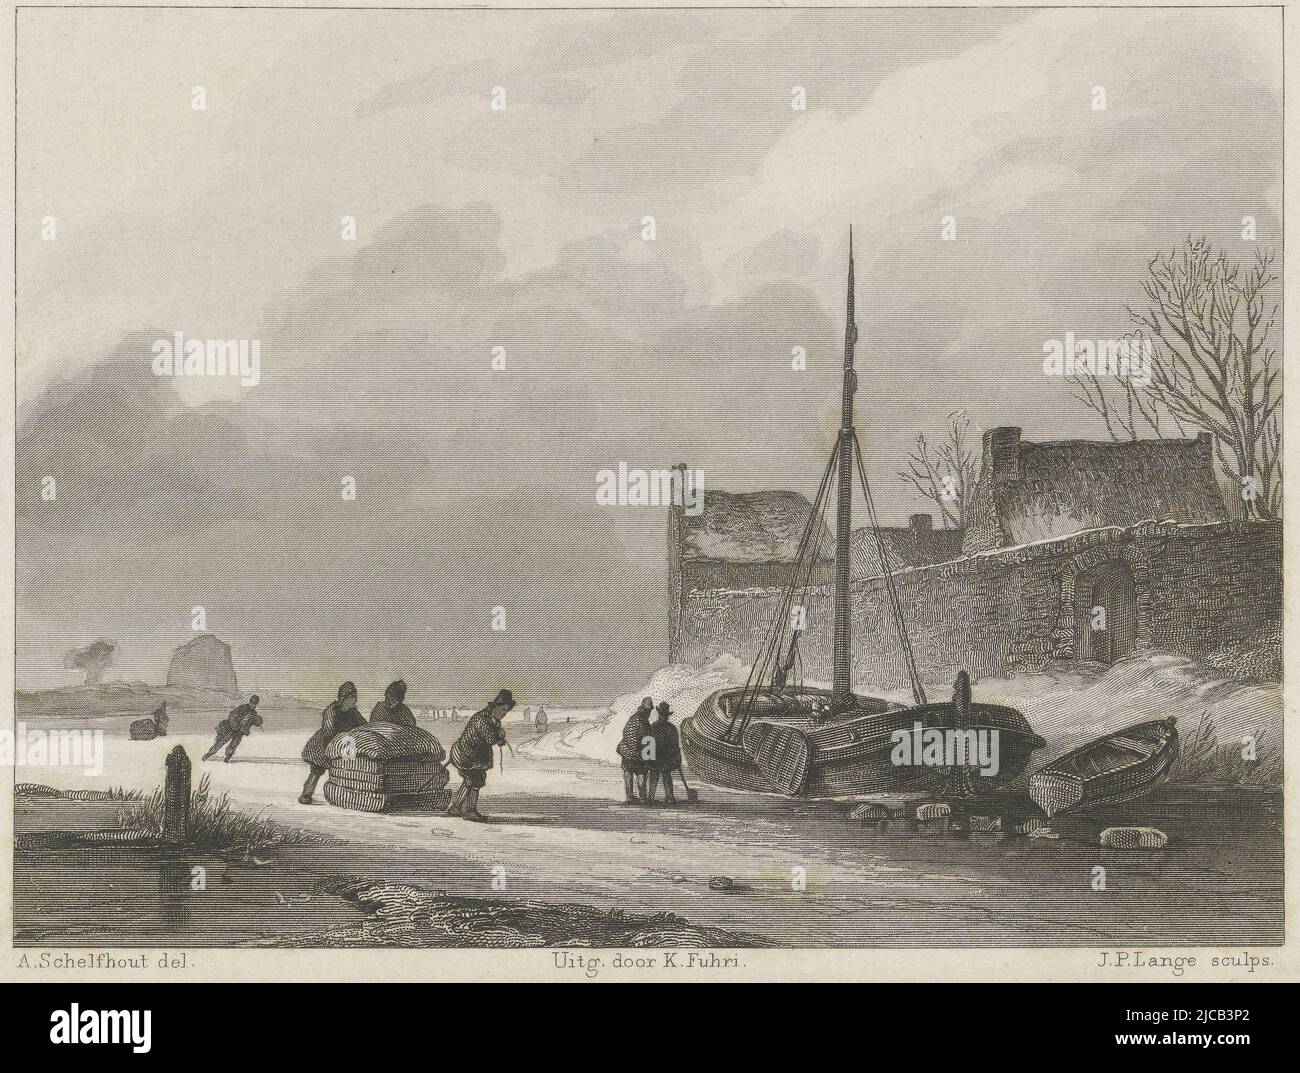 Winter scene with figures on ice, Winter scene, print maker: Johannes Philippus Lange, (mentioned on object), intermediary draughtsman: Andreas Schelfhout, (mentioned on object), publisher: Koenraad Fuhri, (mentioned on object), 1843, paper, steel engraving, h 92 mm × w 157 mm Stock Photo